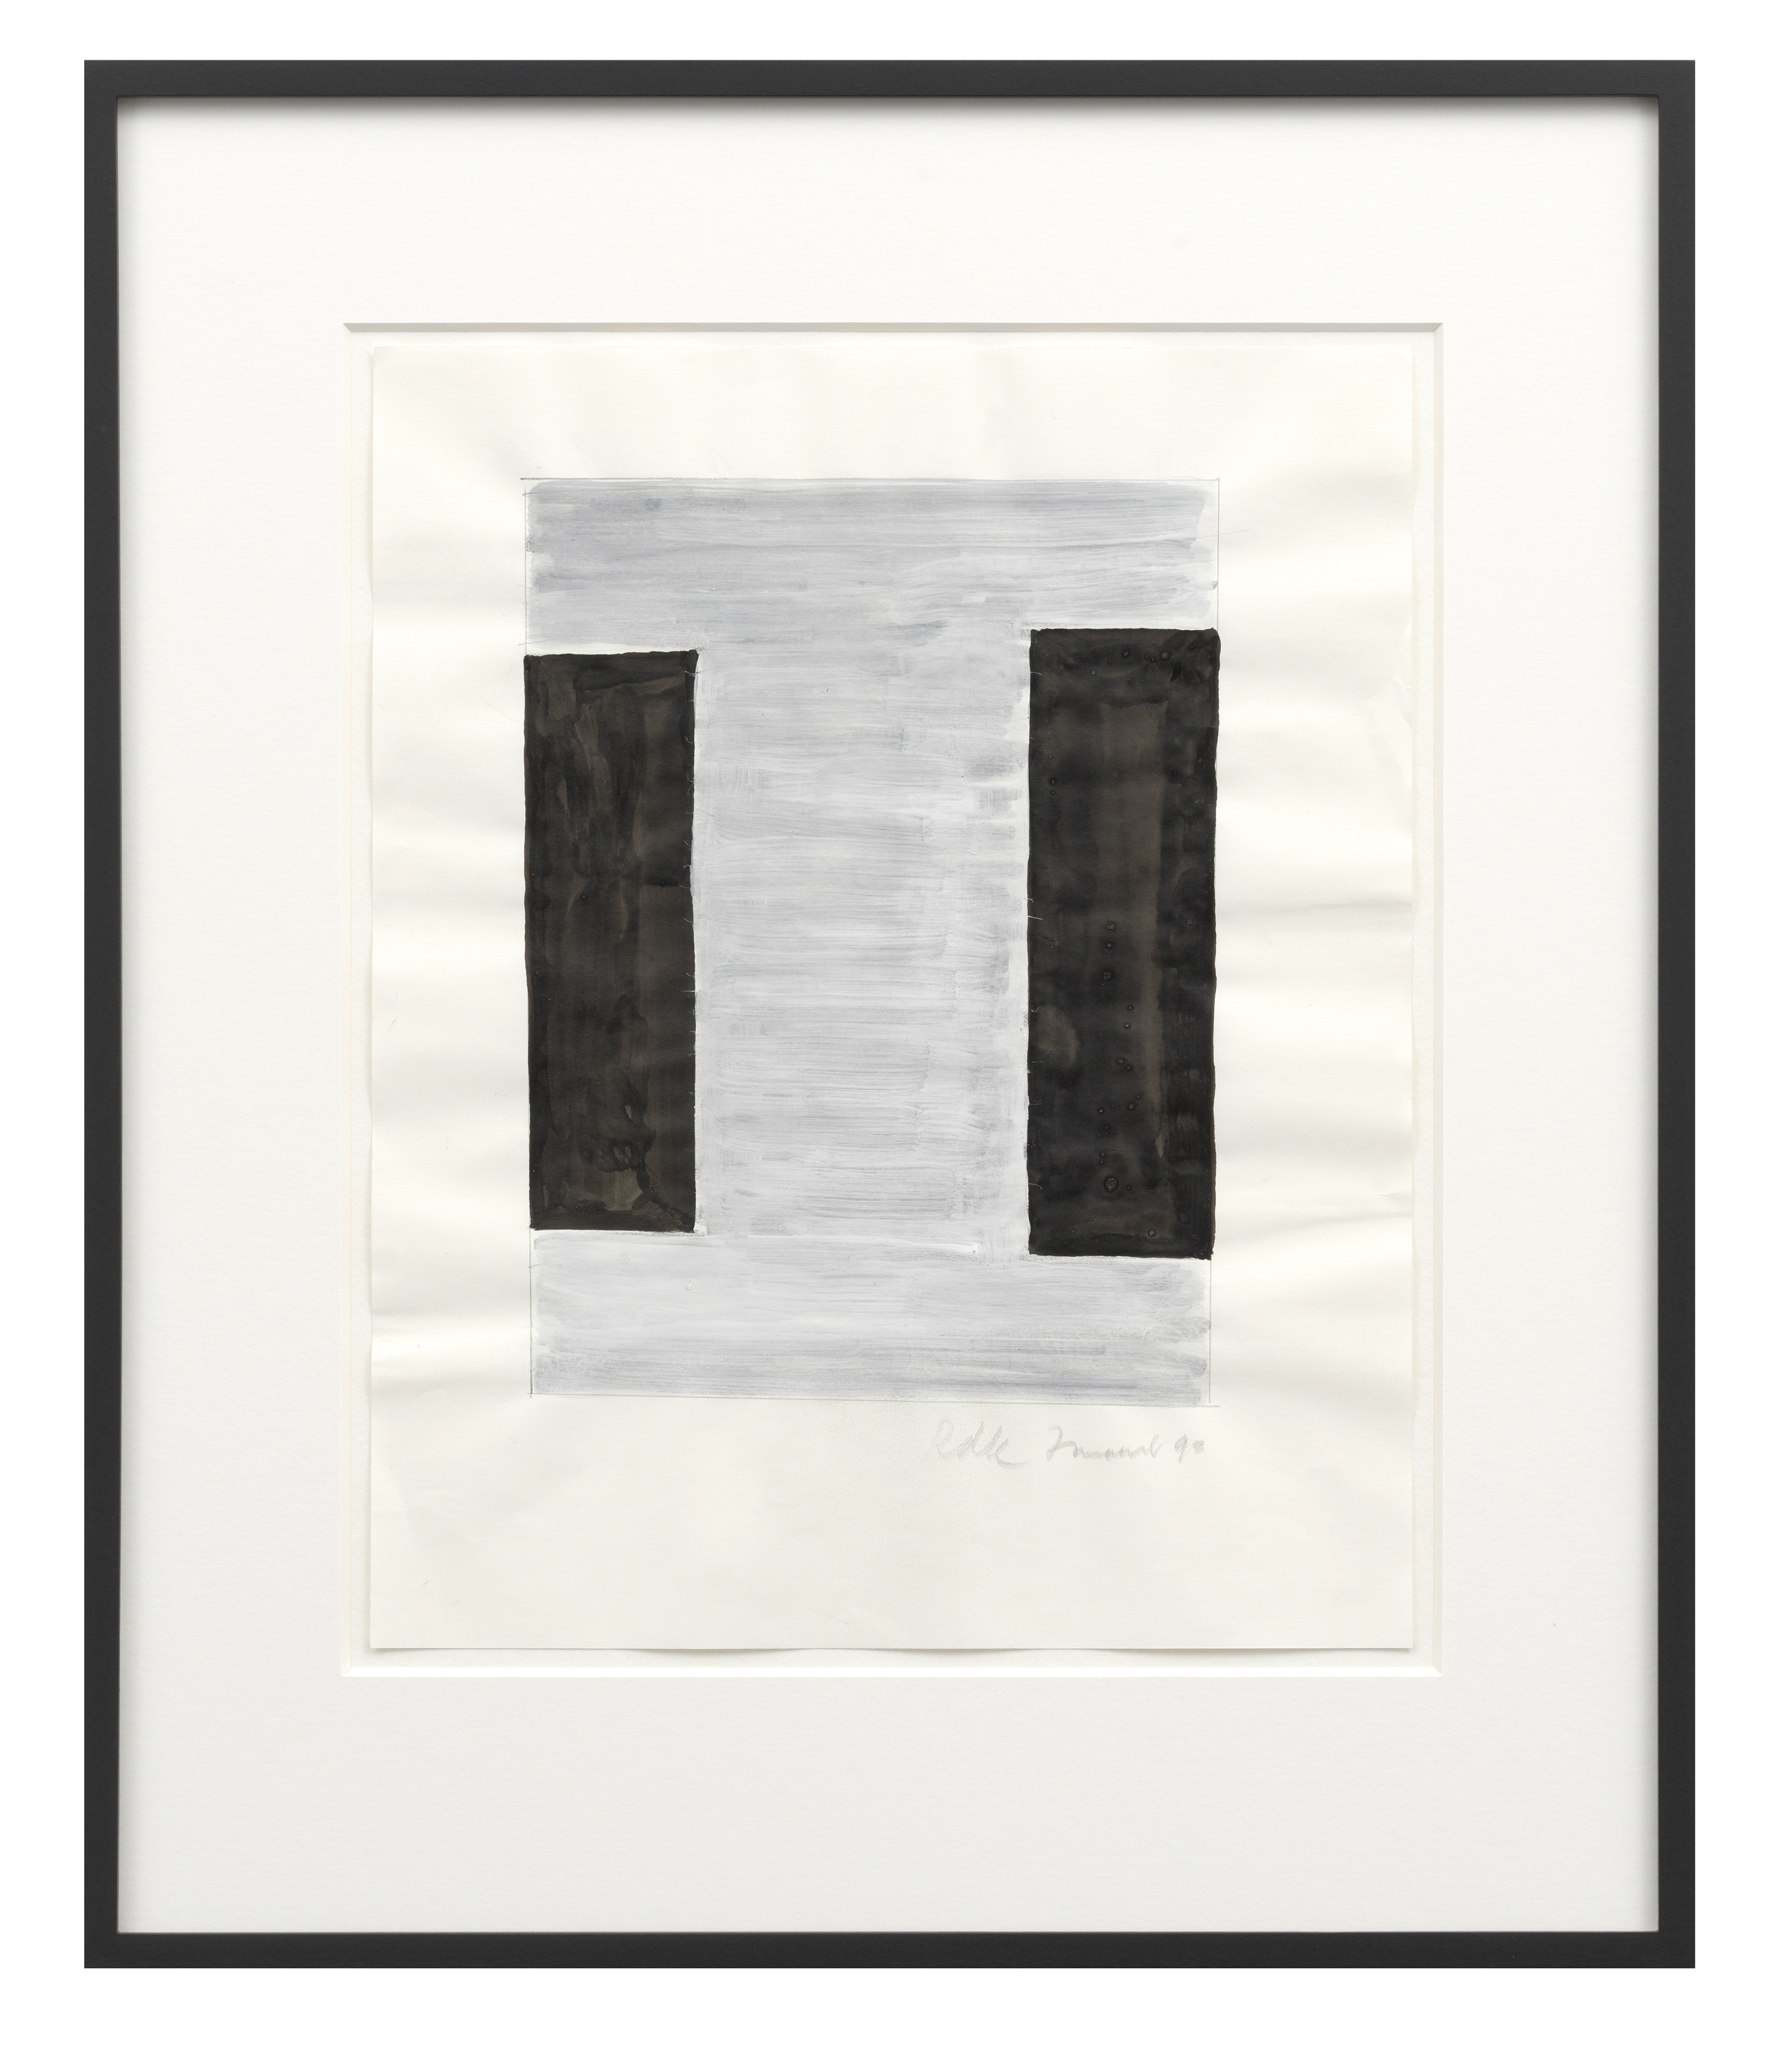 Raoul De KeyserMarch 7, 1990, 1990pencil, ink and gesso on paper27.5 x 34 cm | 10 3/4 x 13 1/2 in